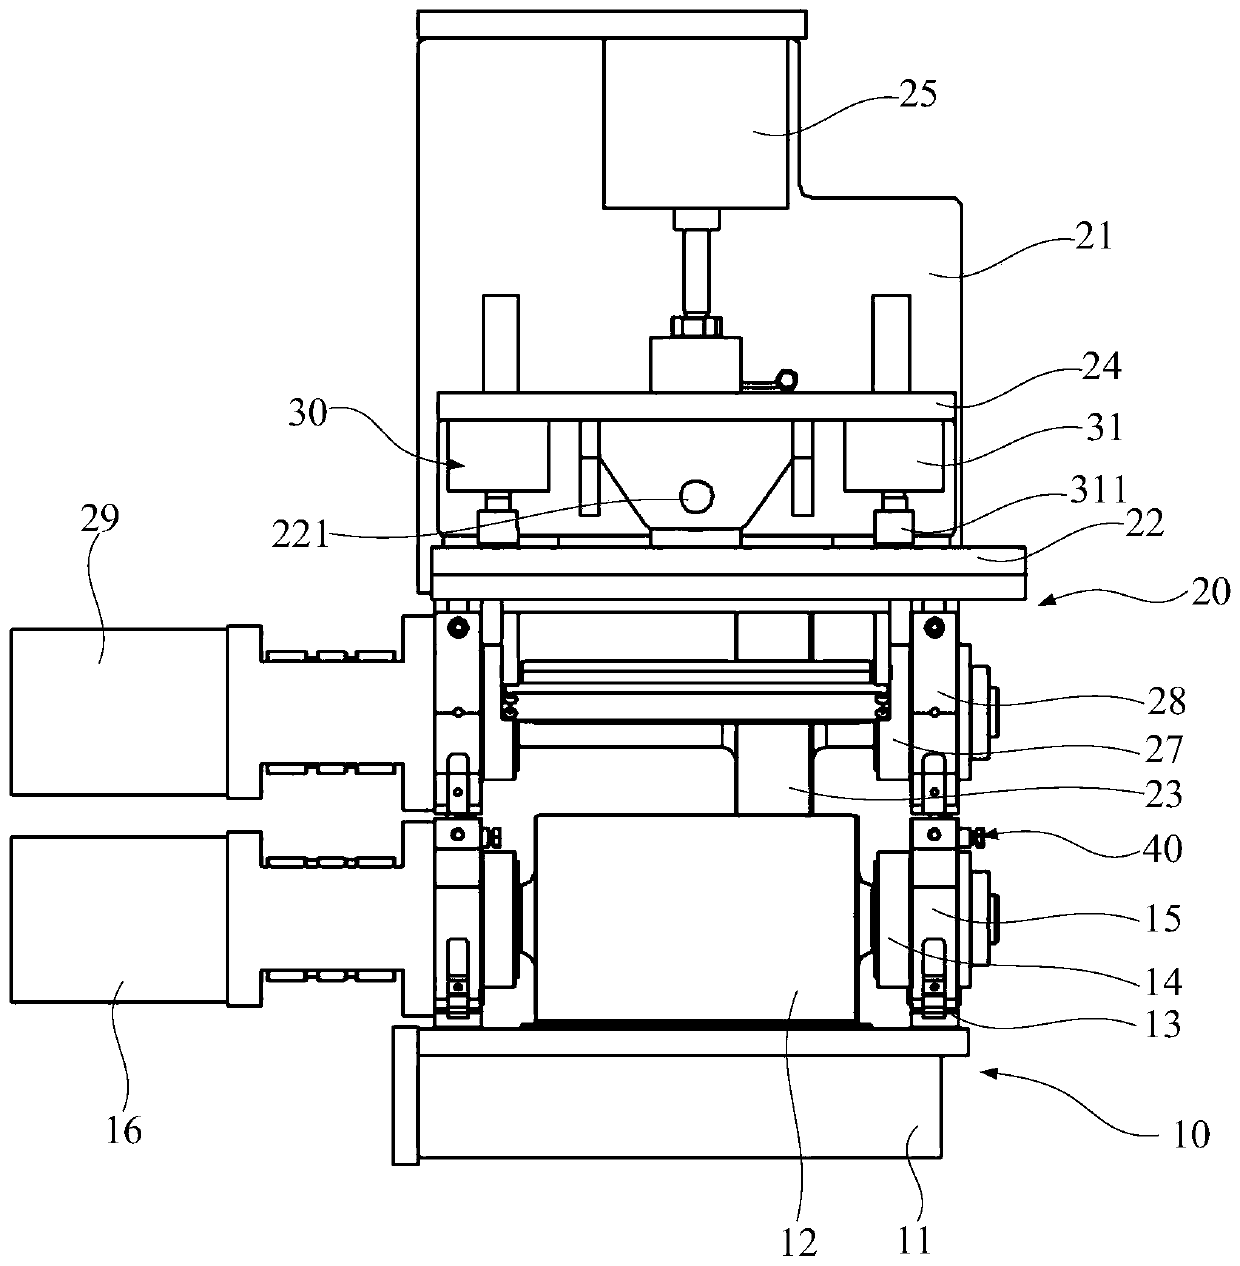 Film material compounding device